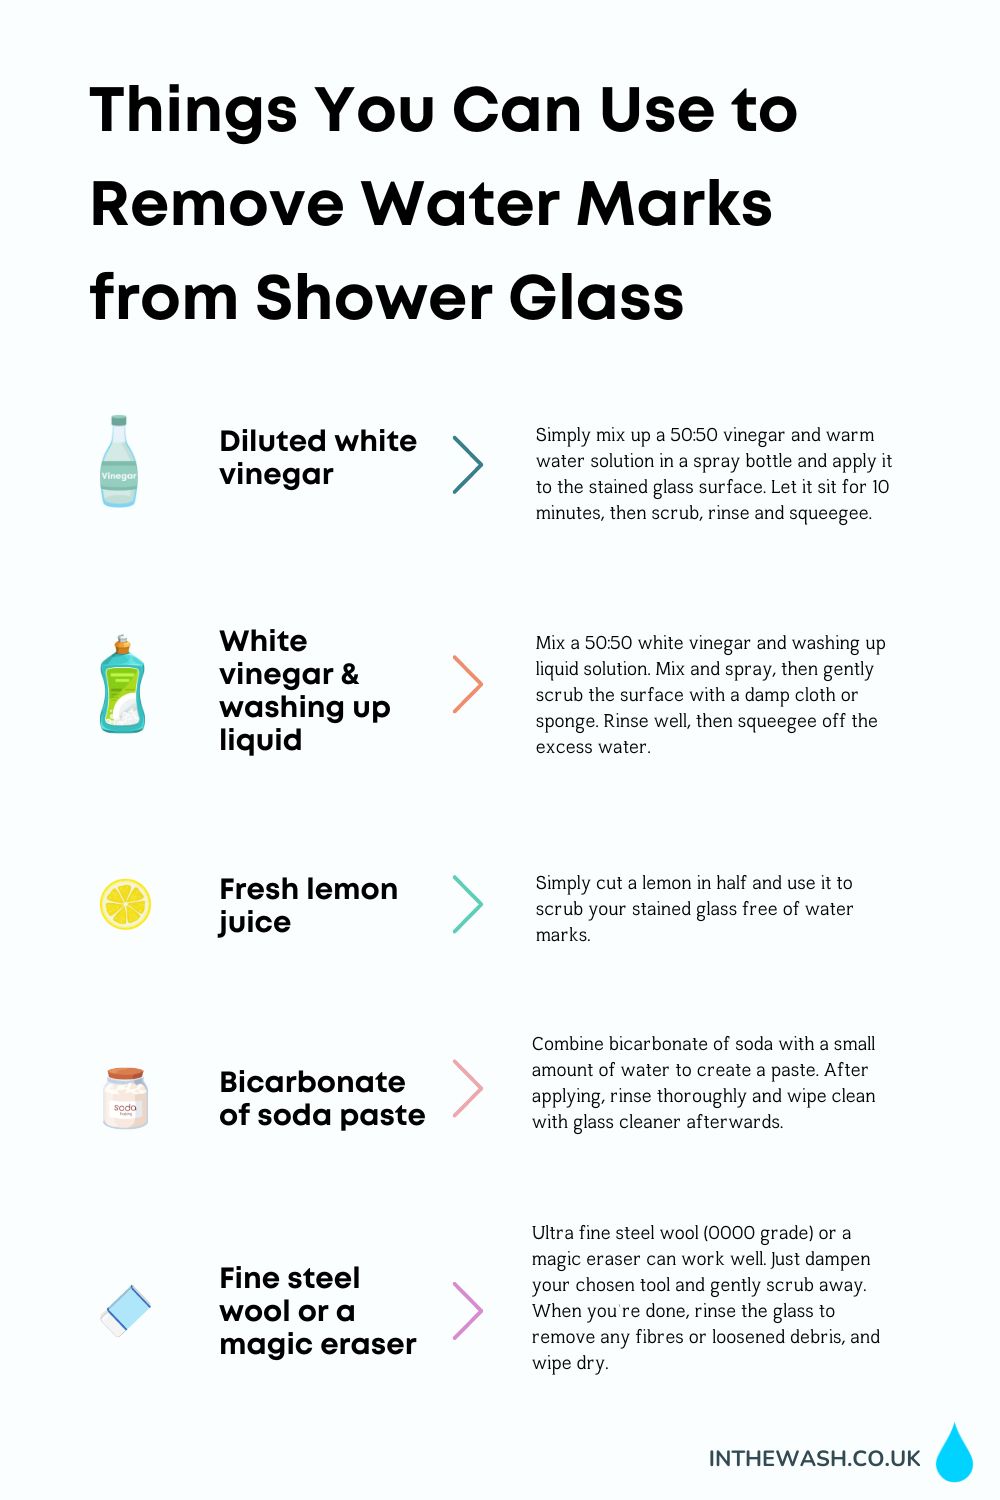 Things you can use to remove water marks from shower glass